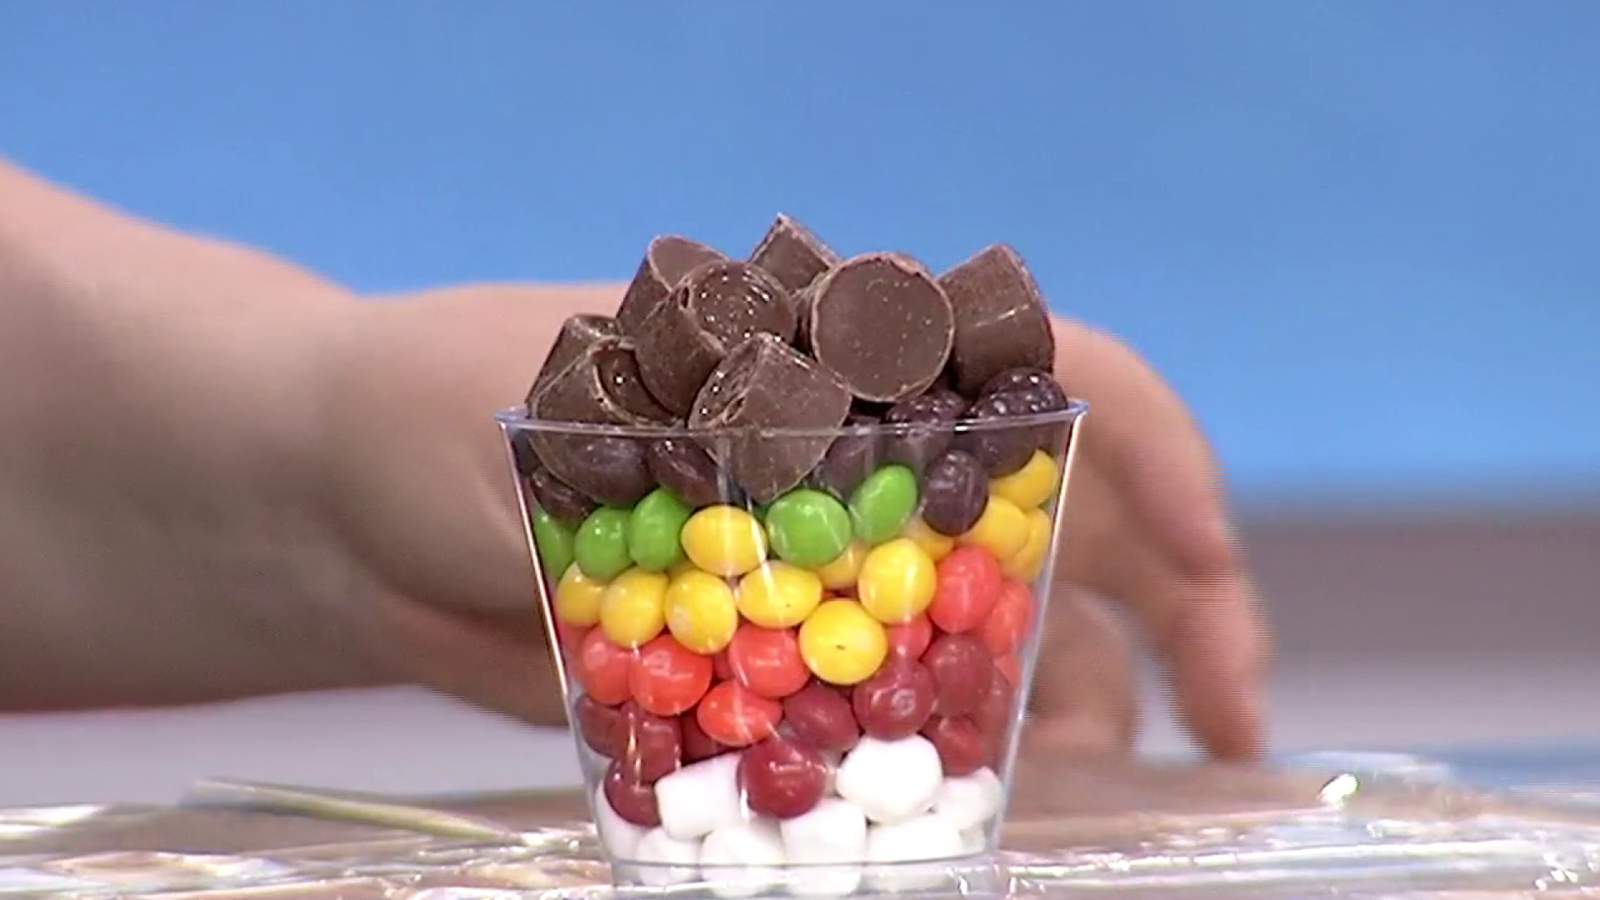 Skittles, Rolos and mini marshmellows, you’ll love these Rainbow Snack Cups